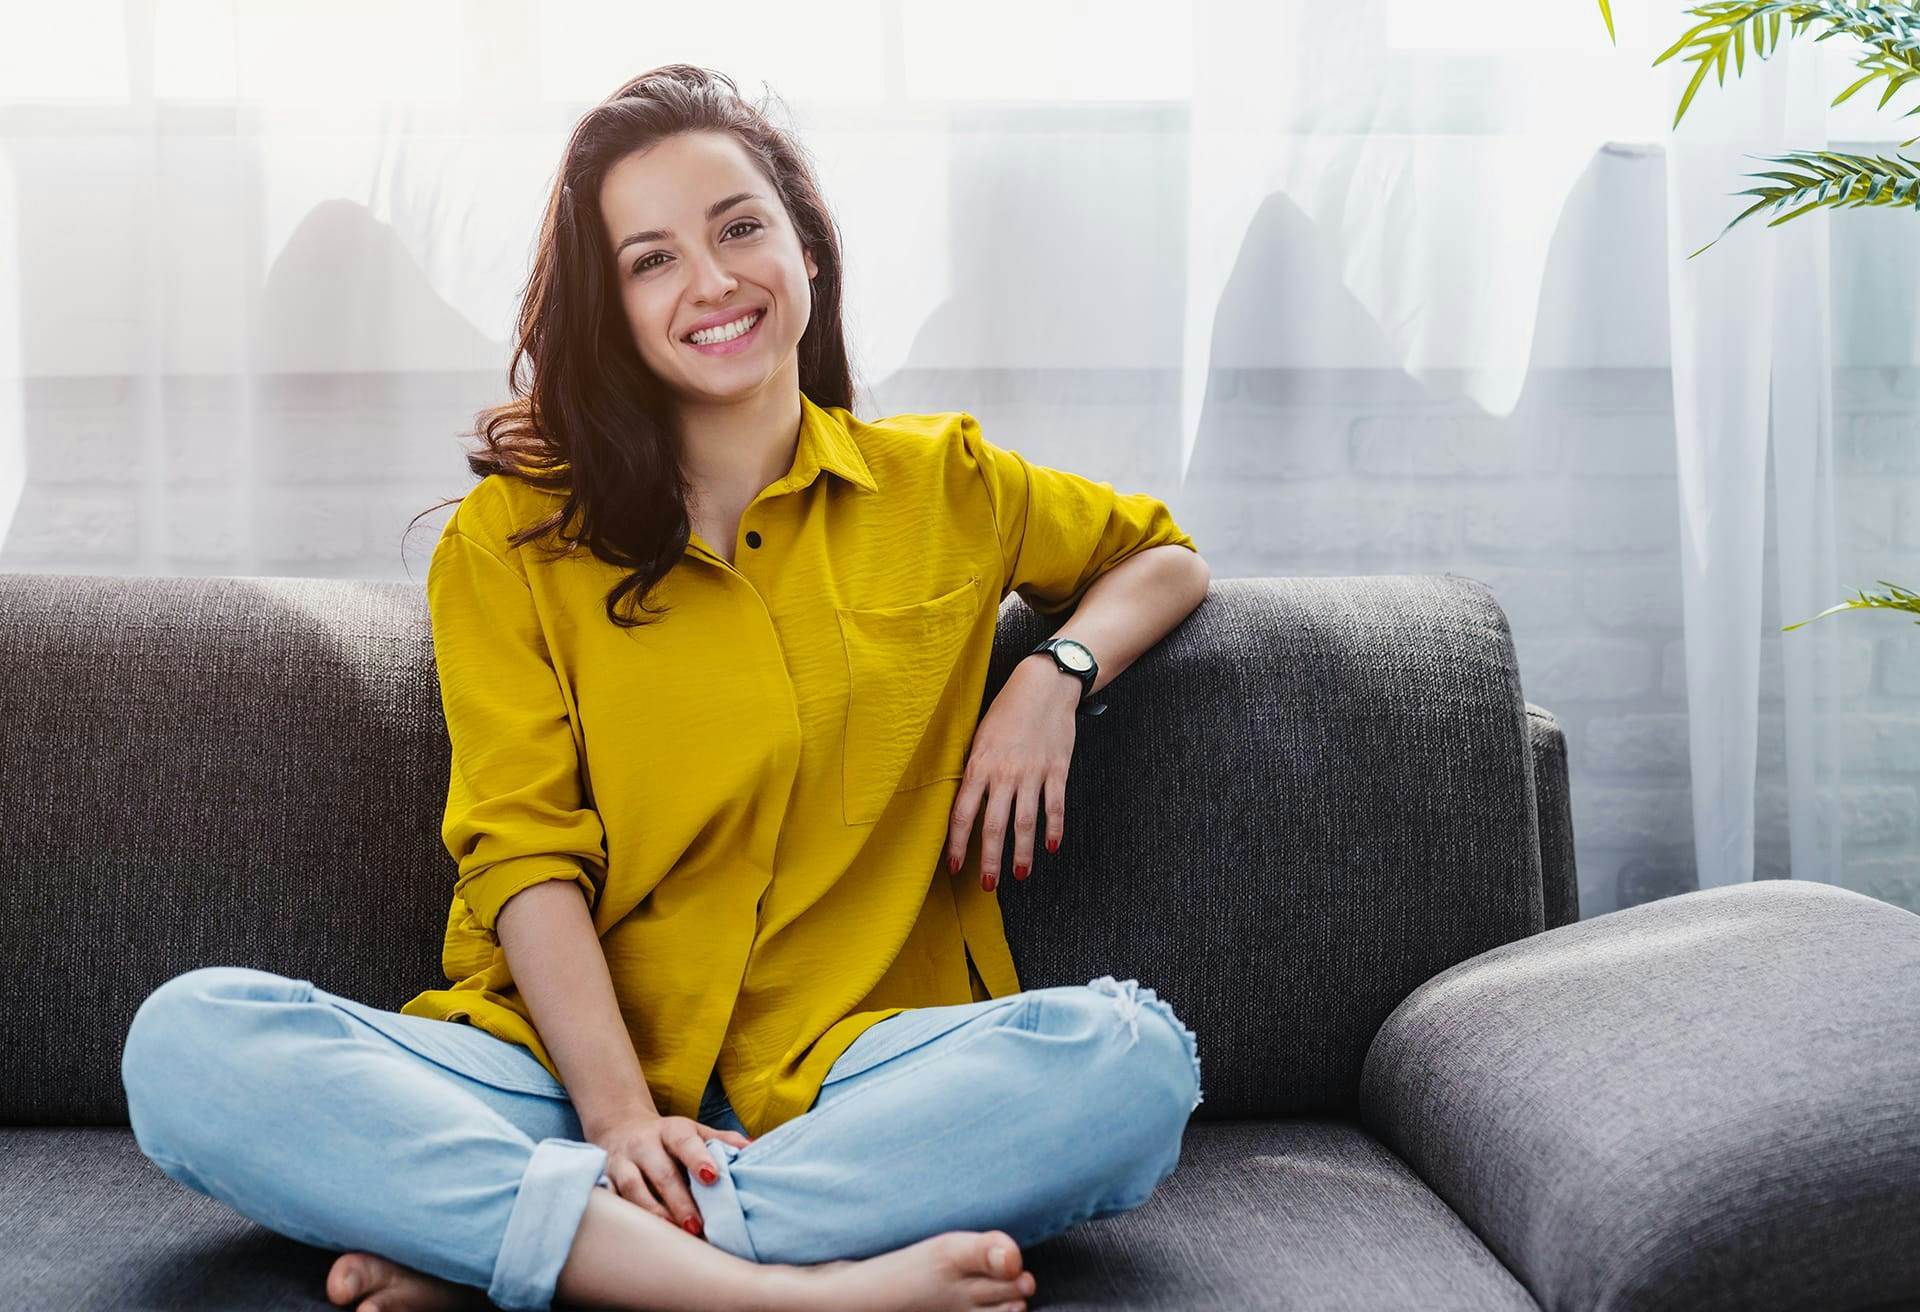 Woman in yellow top sitting on couch